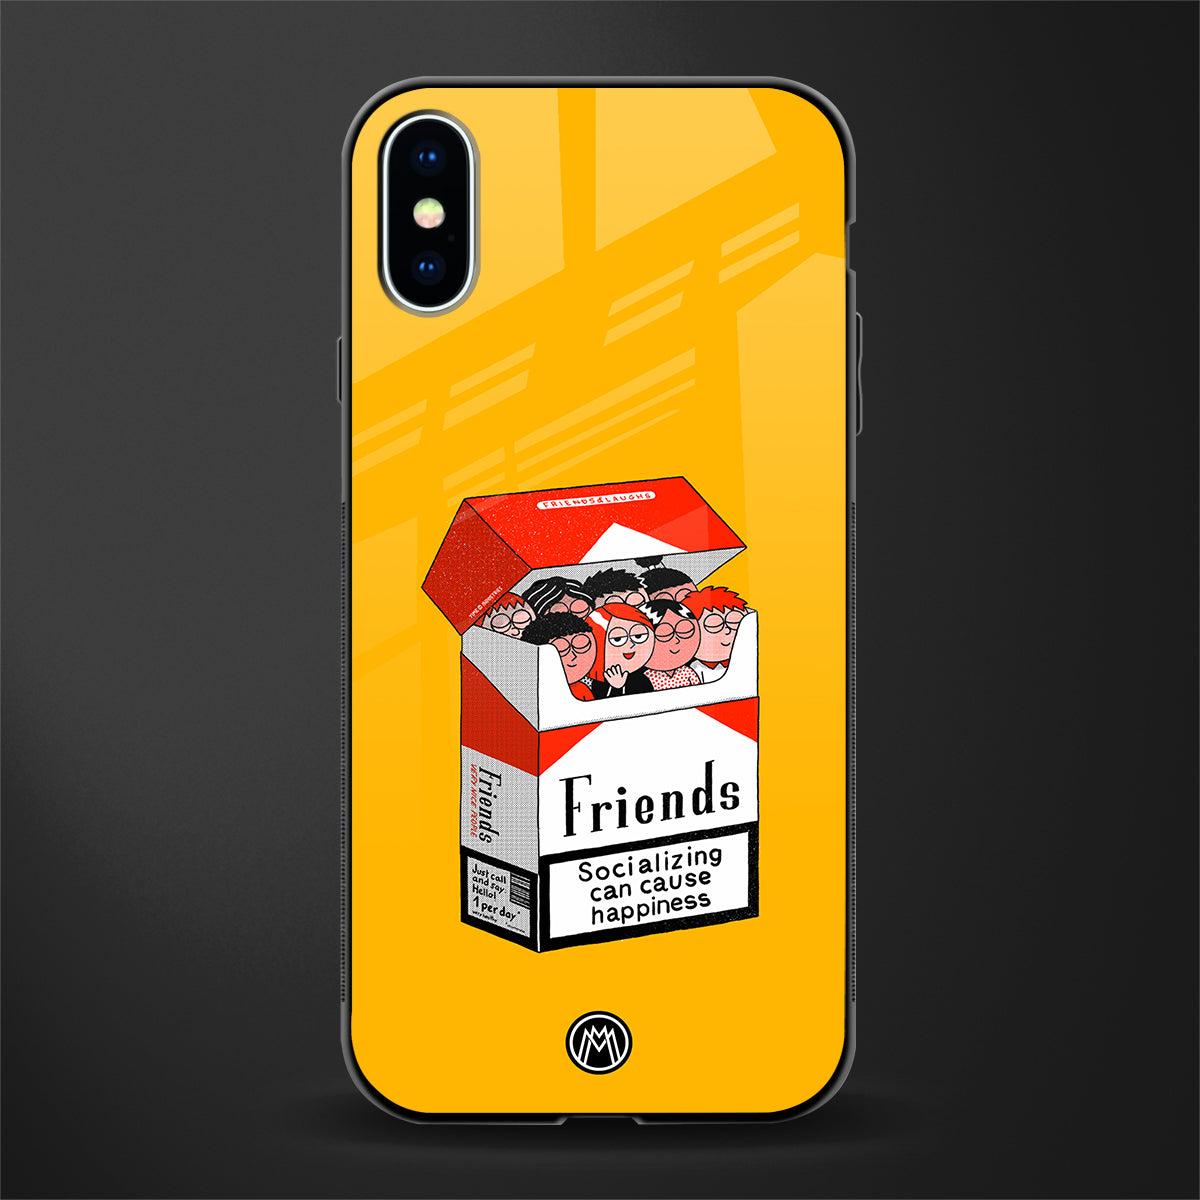 socializing can cause happiness glass case for iphone x image